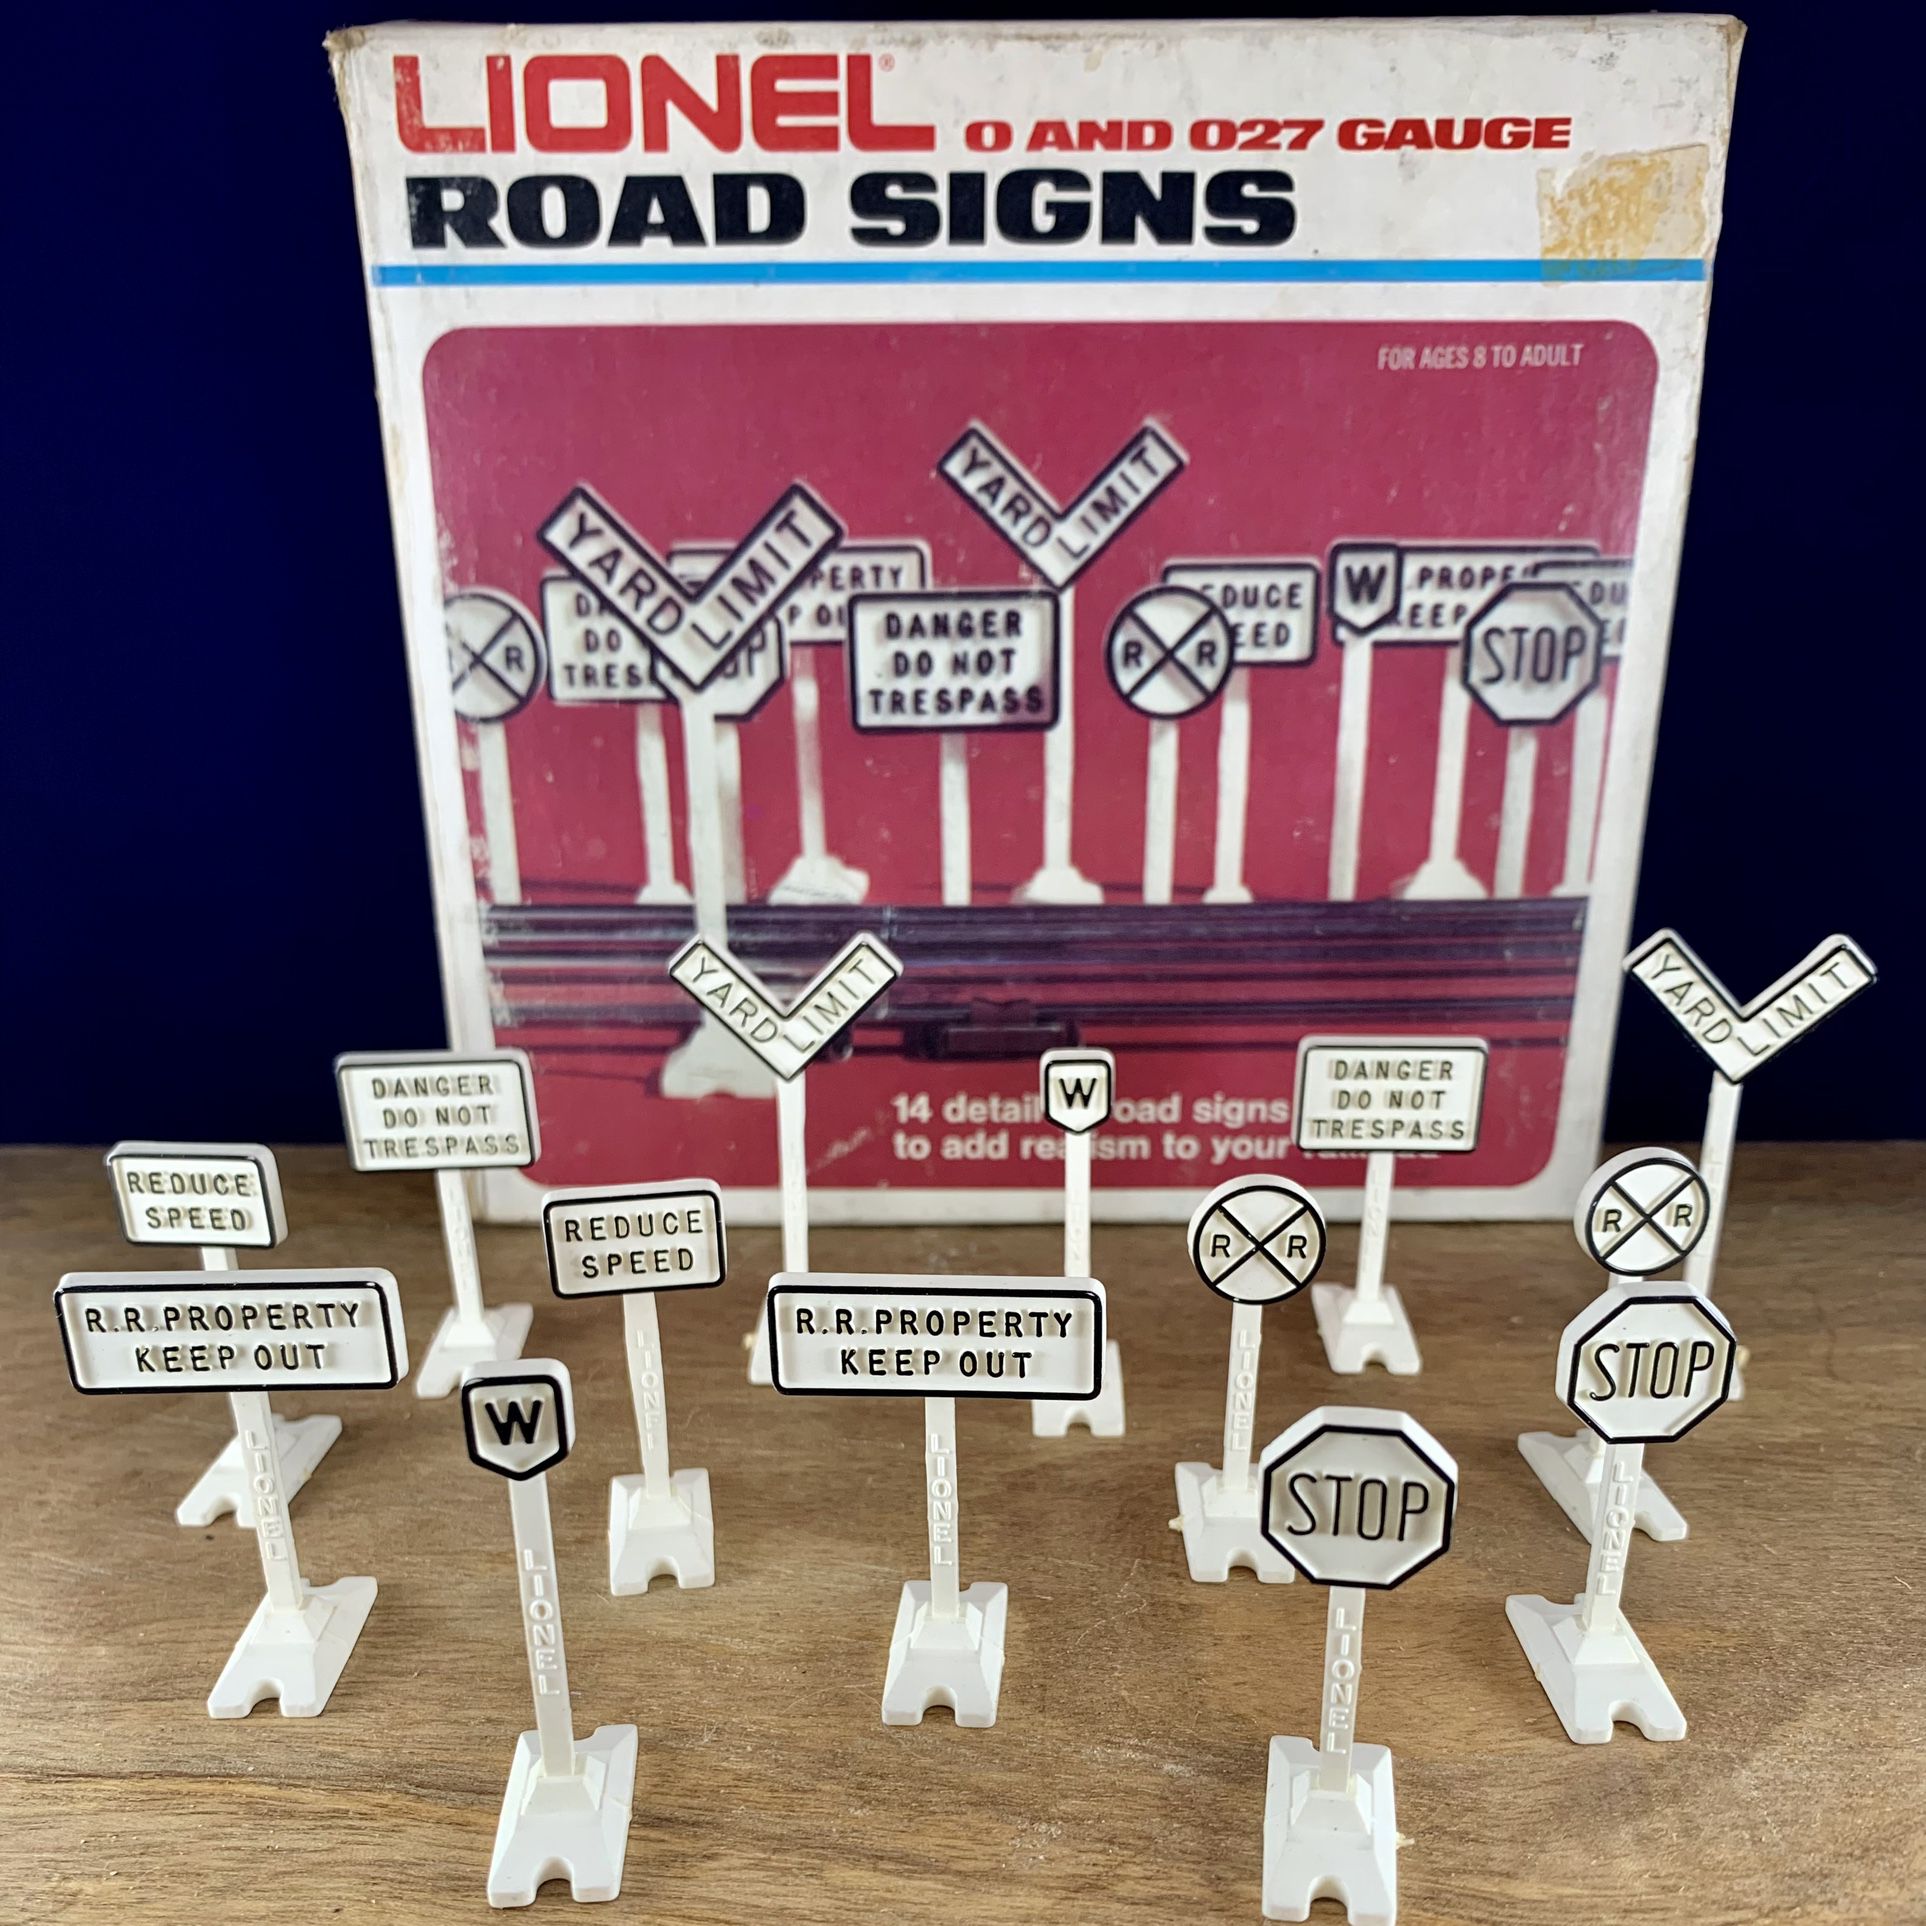 Vintage Lionel Train Road Signs with Original Box (O and O27 Gauge) 14 Signs